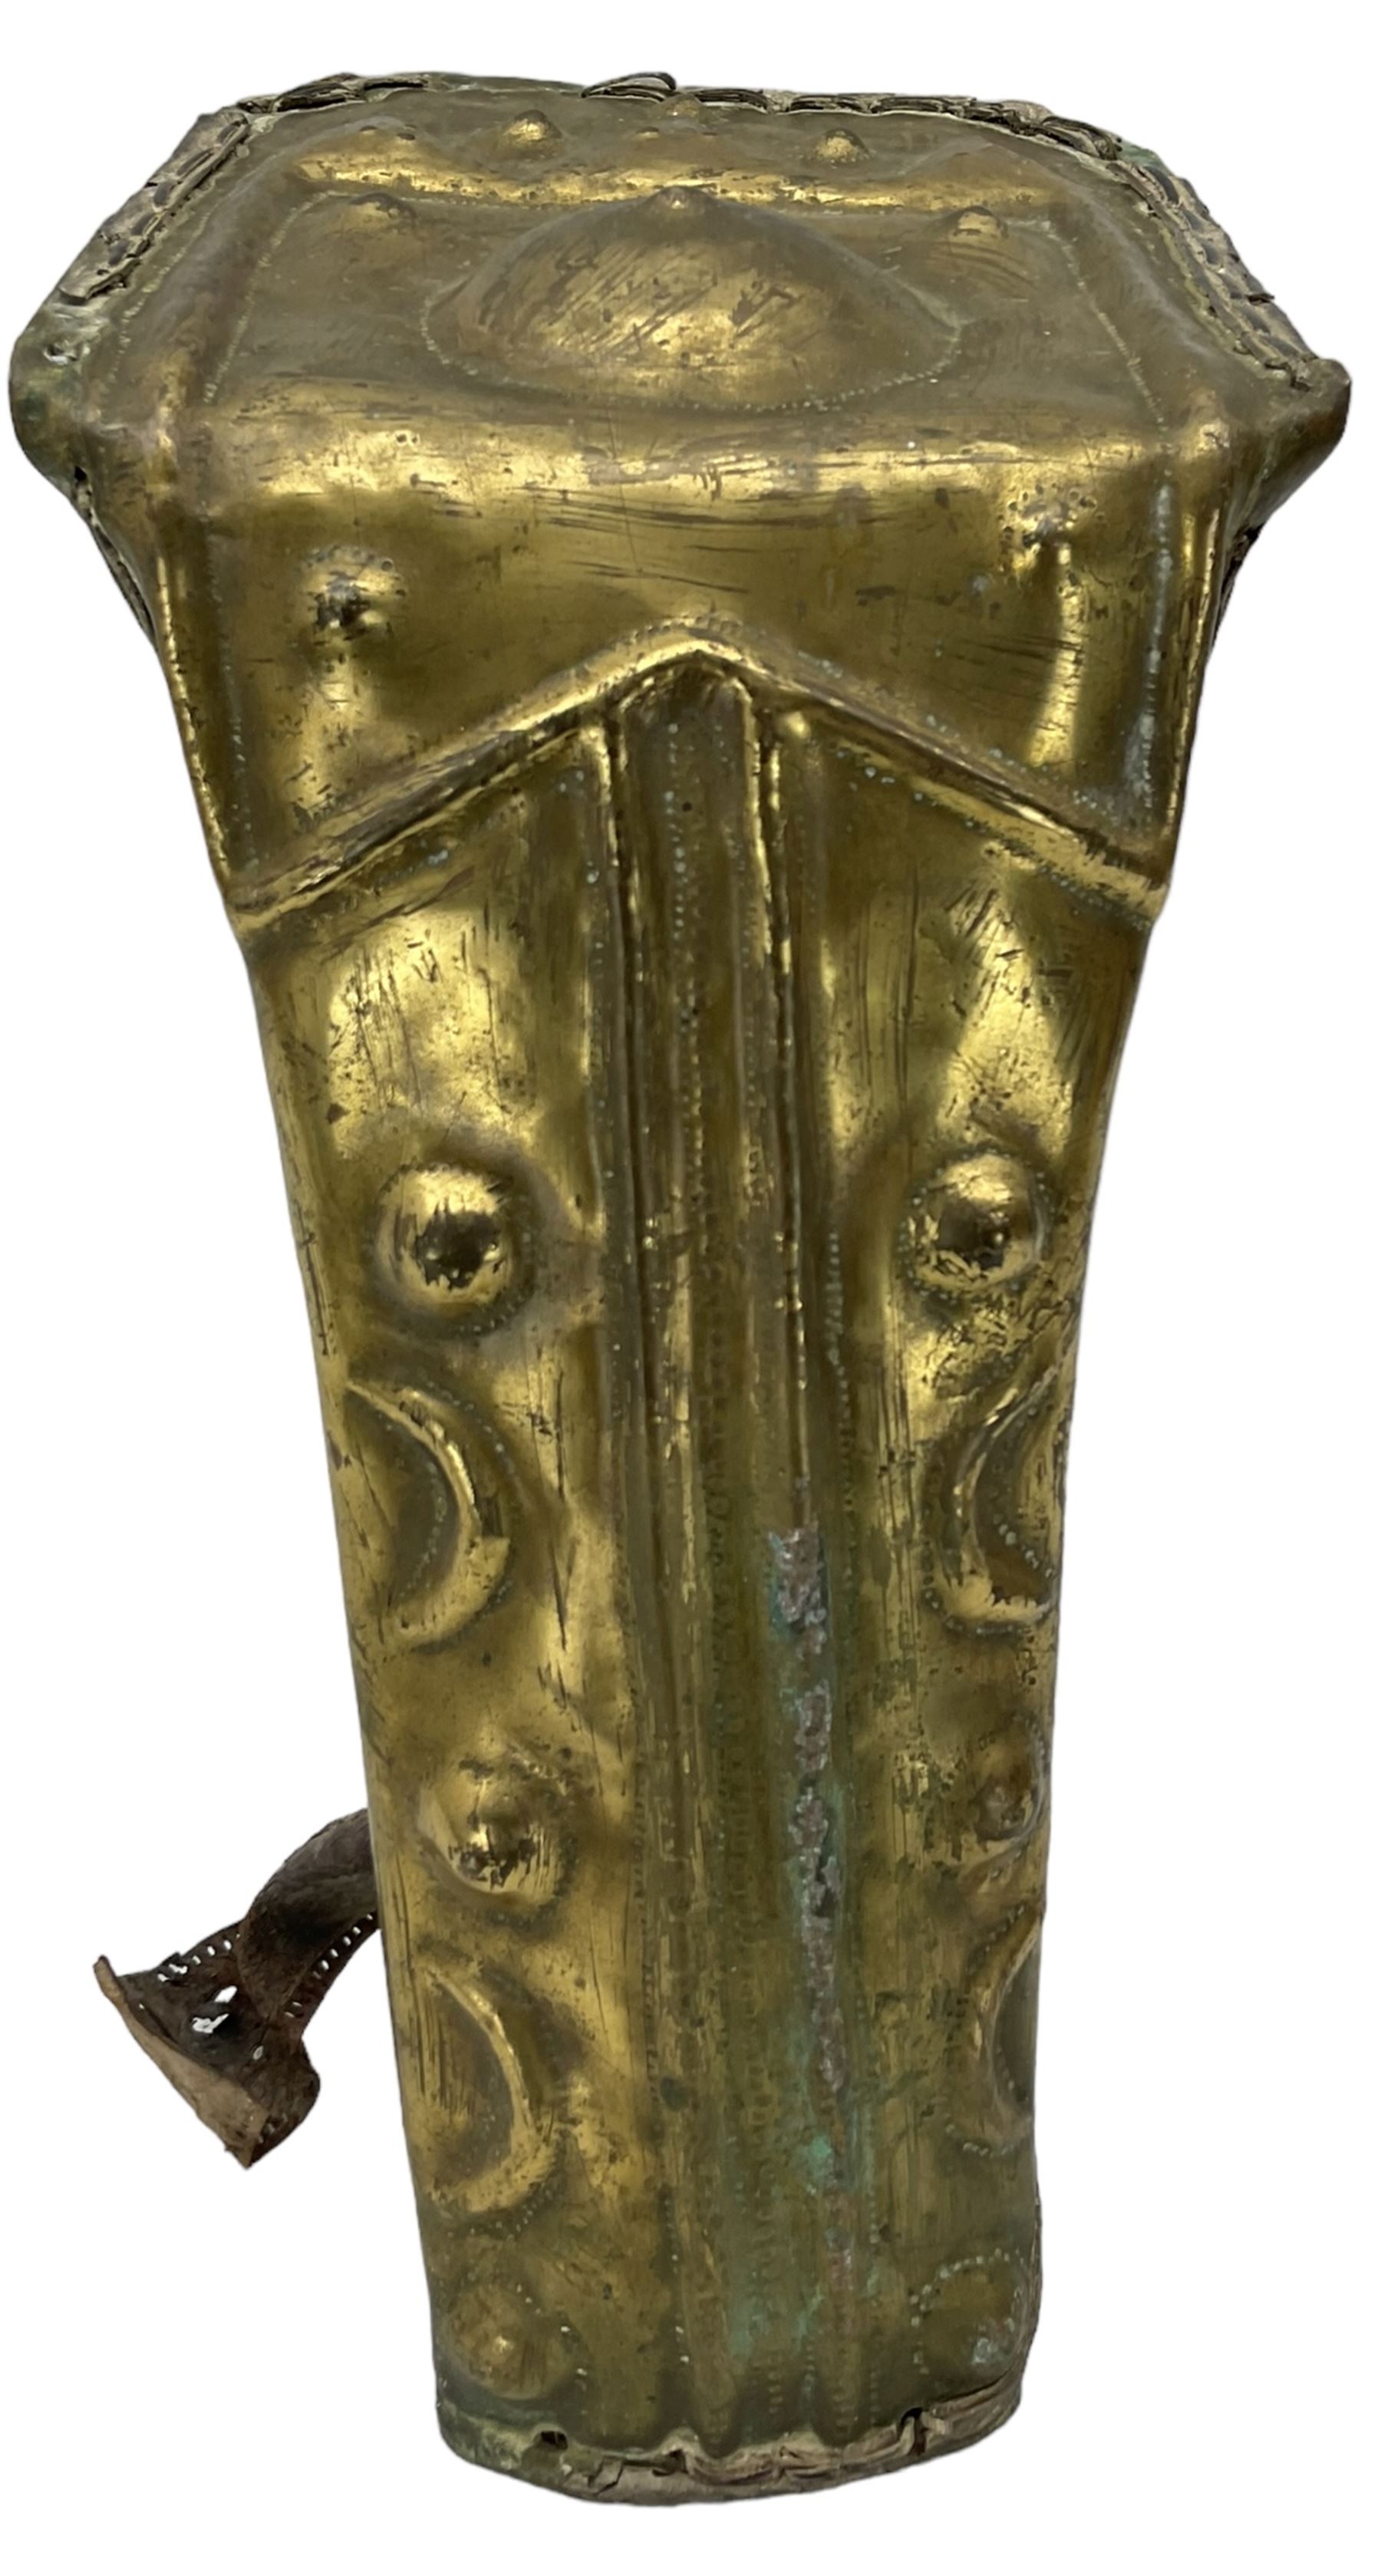 19th century Sudanese brass camel Chanfron with raised decoration - Image 3 of 4